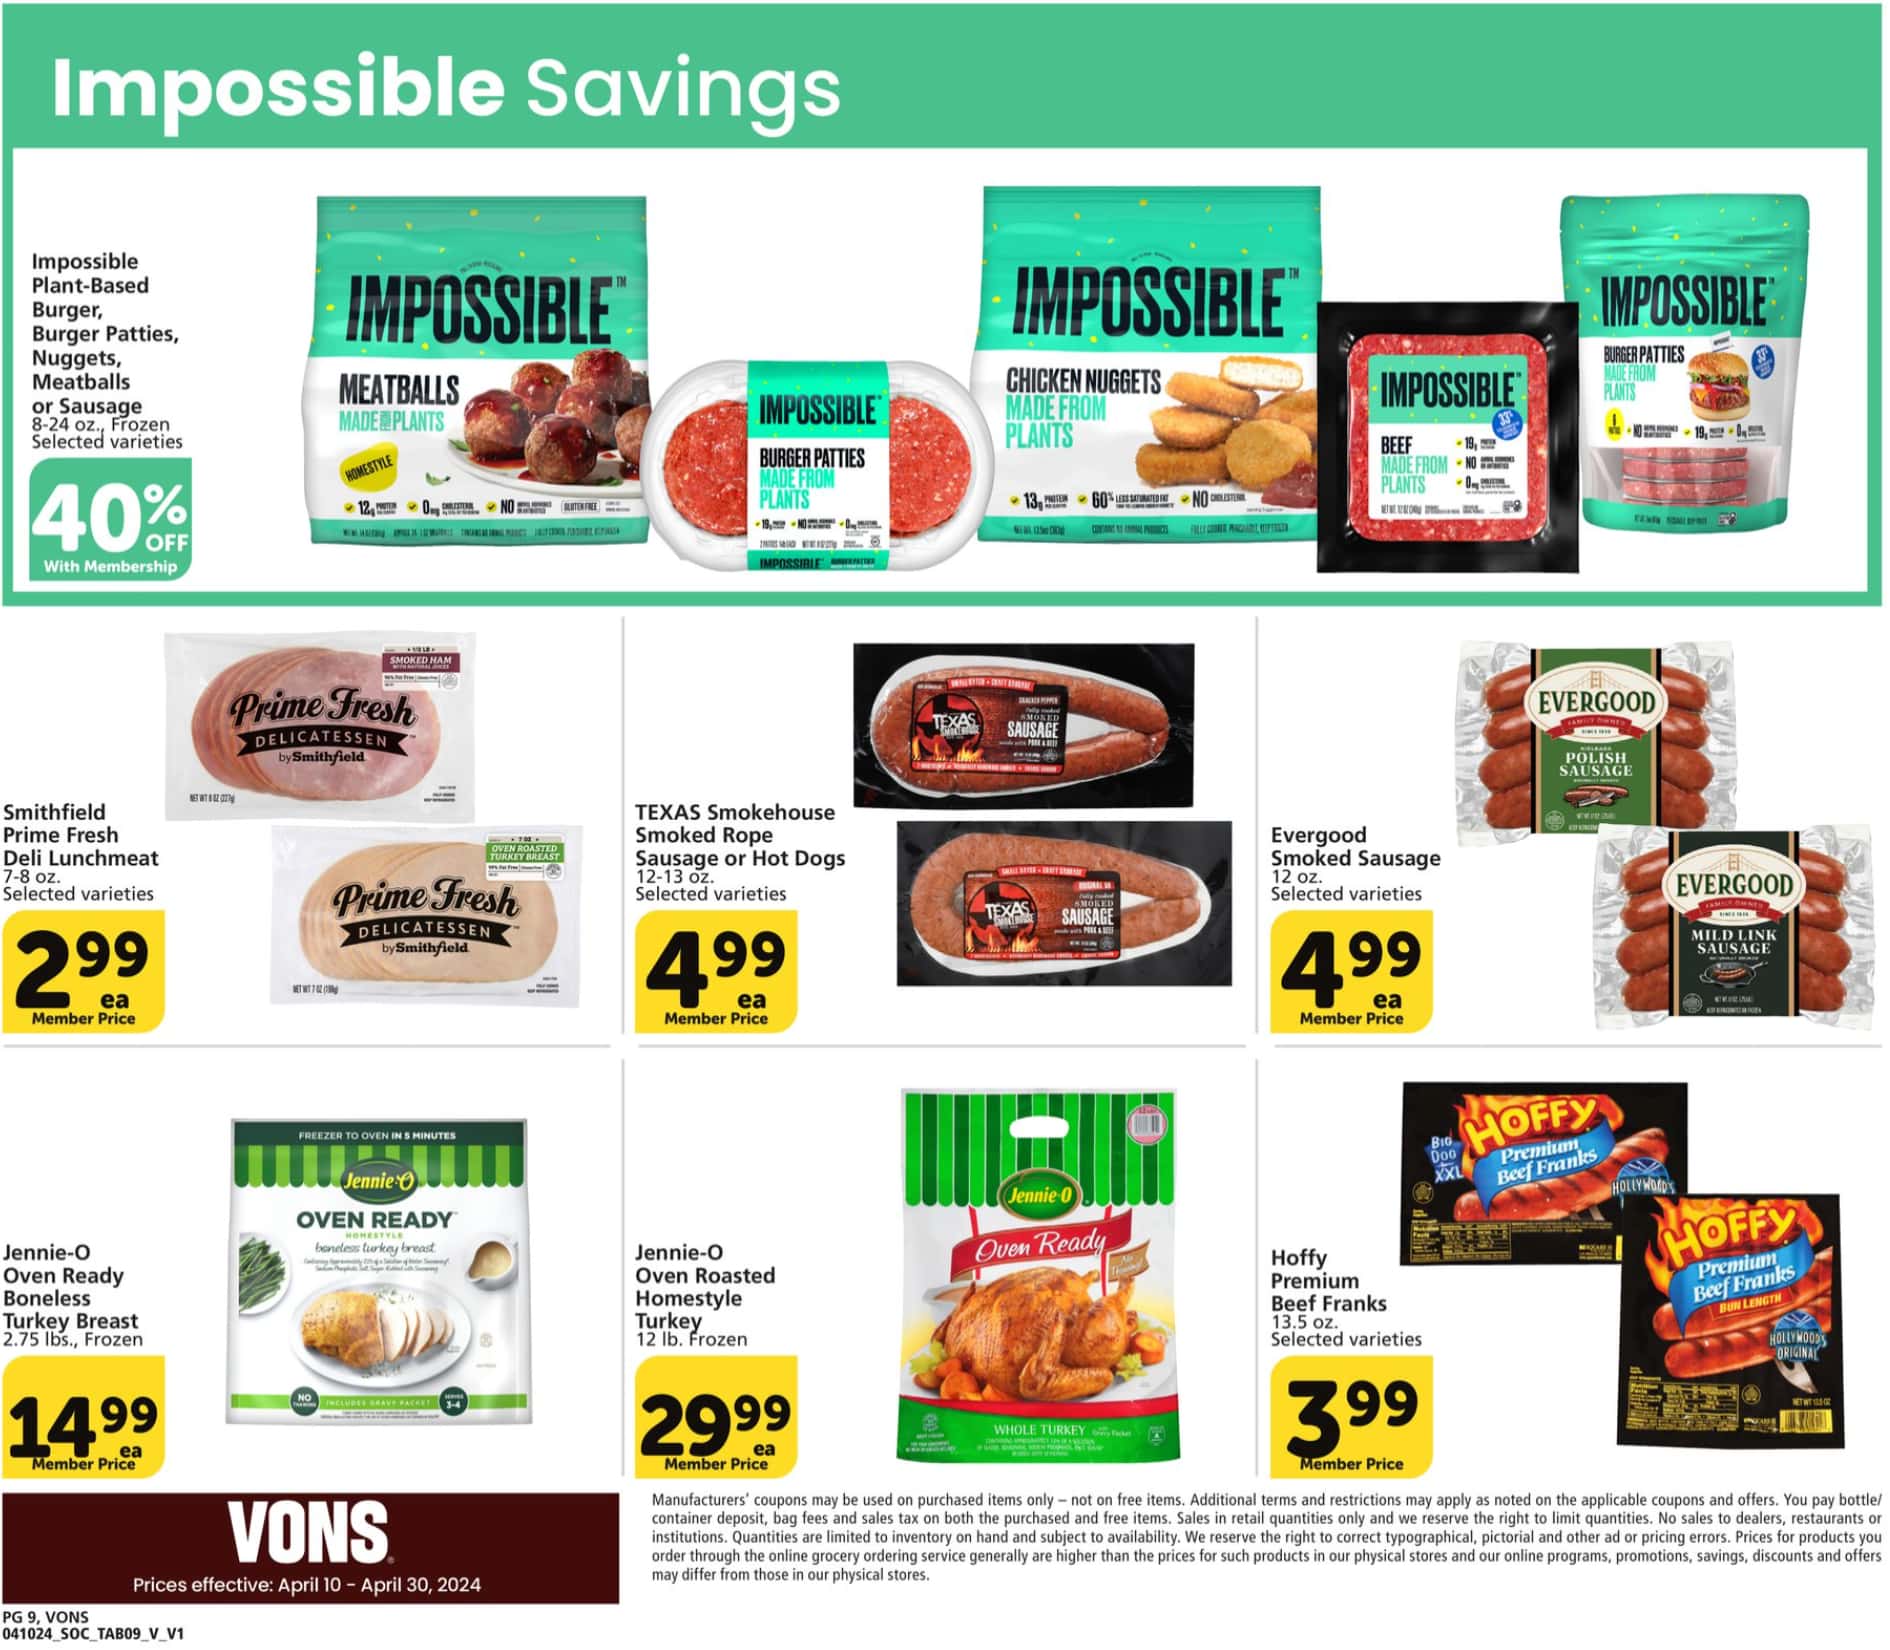 Vons_weekly_ad_040924_08